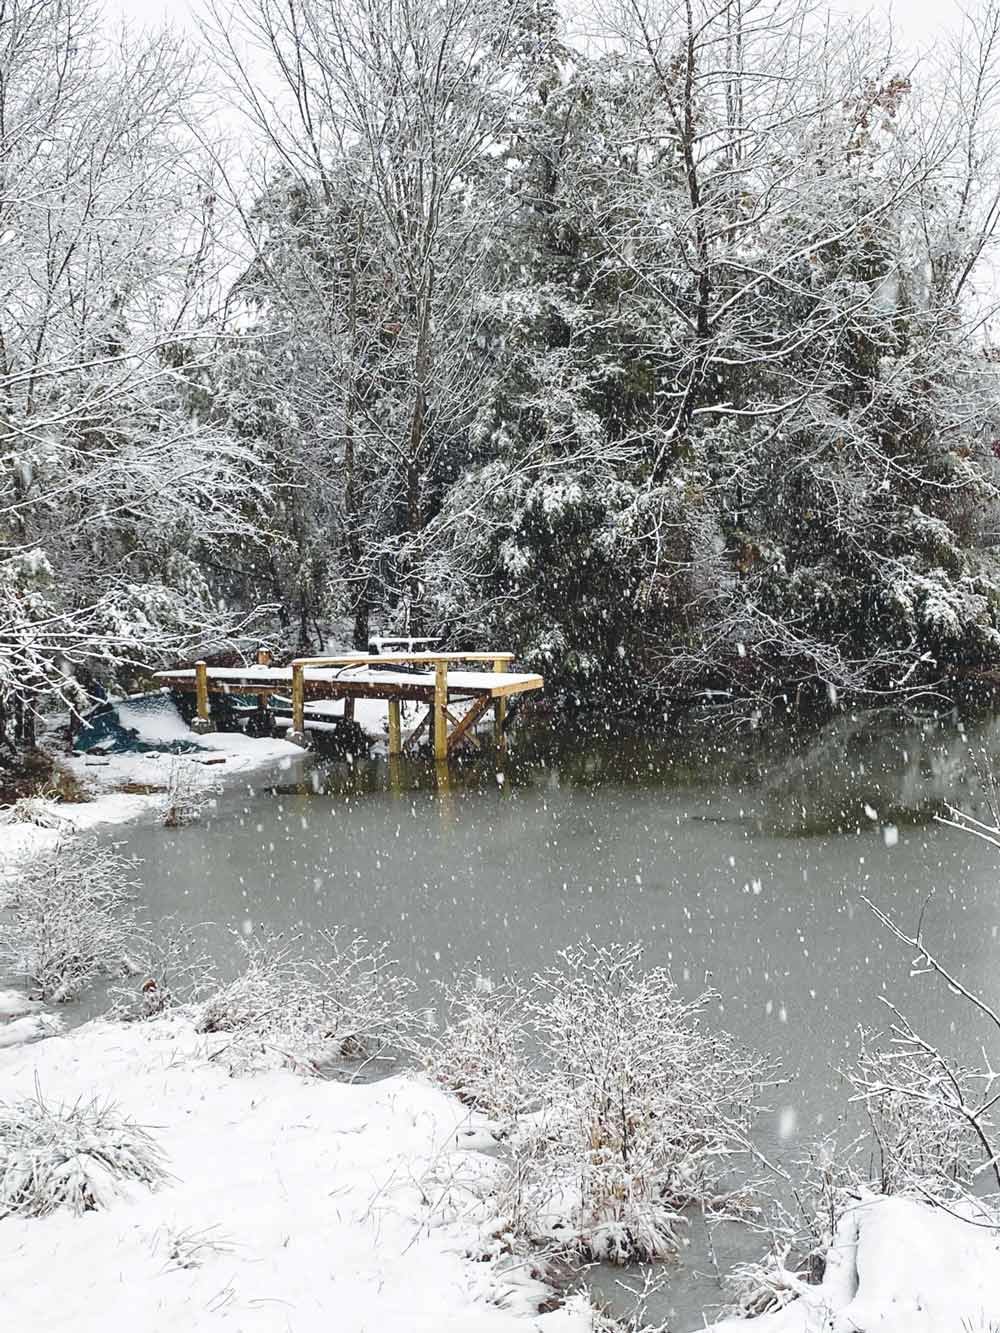 Don Payne took a photo during the snowstorm of his new fish dock at the house on Highway 74.